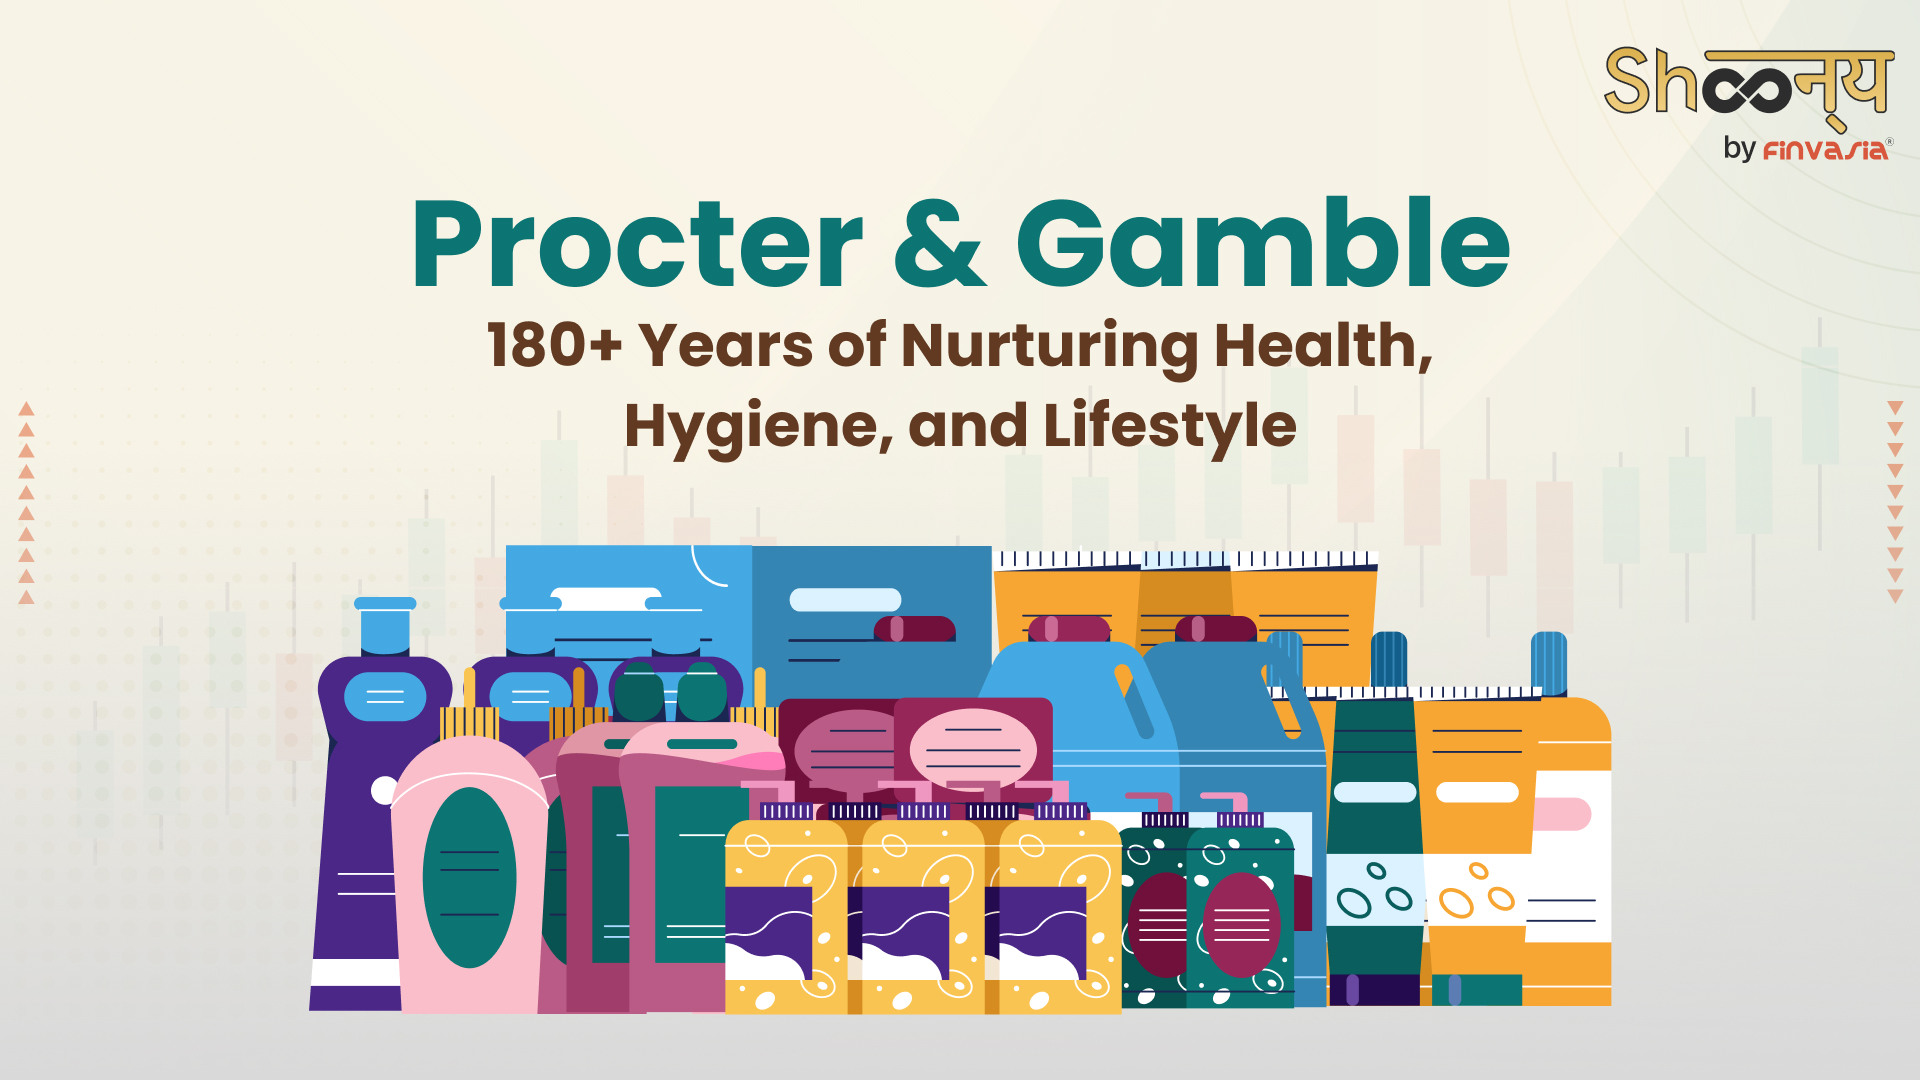 Procter & Gamble| History, Popular Brands and Products